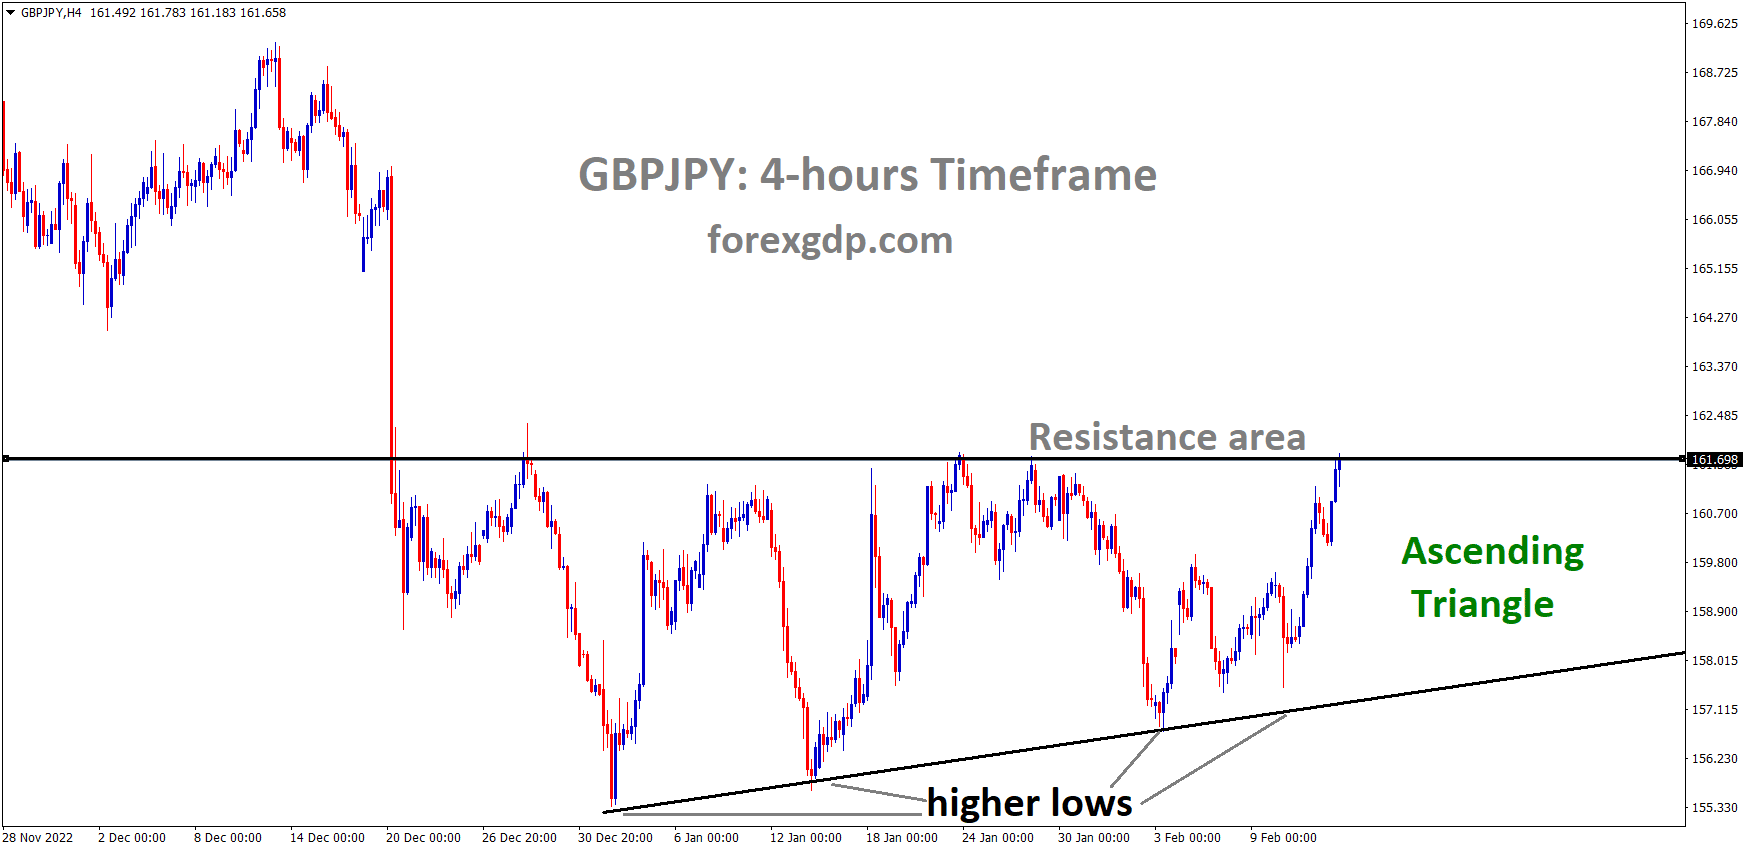 GBPJPY H4 TF analysis Market is moving in an Ascending triangle pattern and the market has reached the resistance area of the pattern.